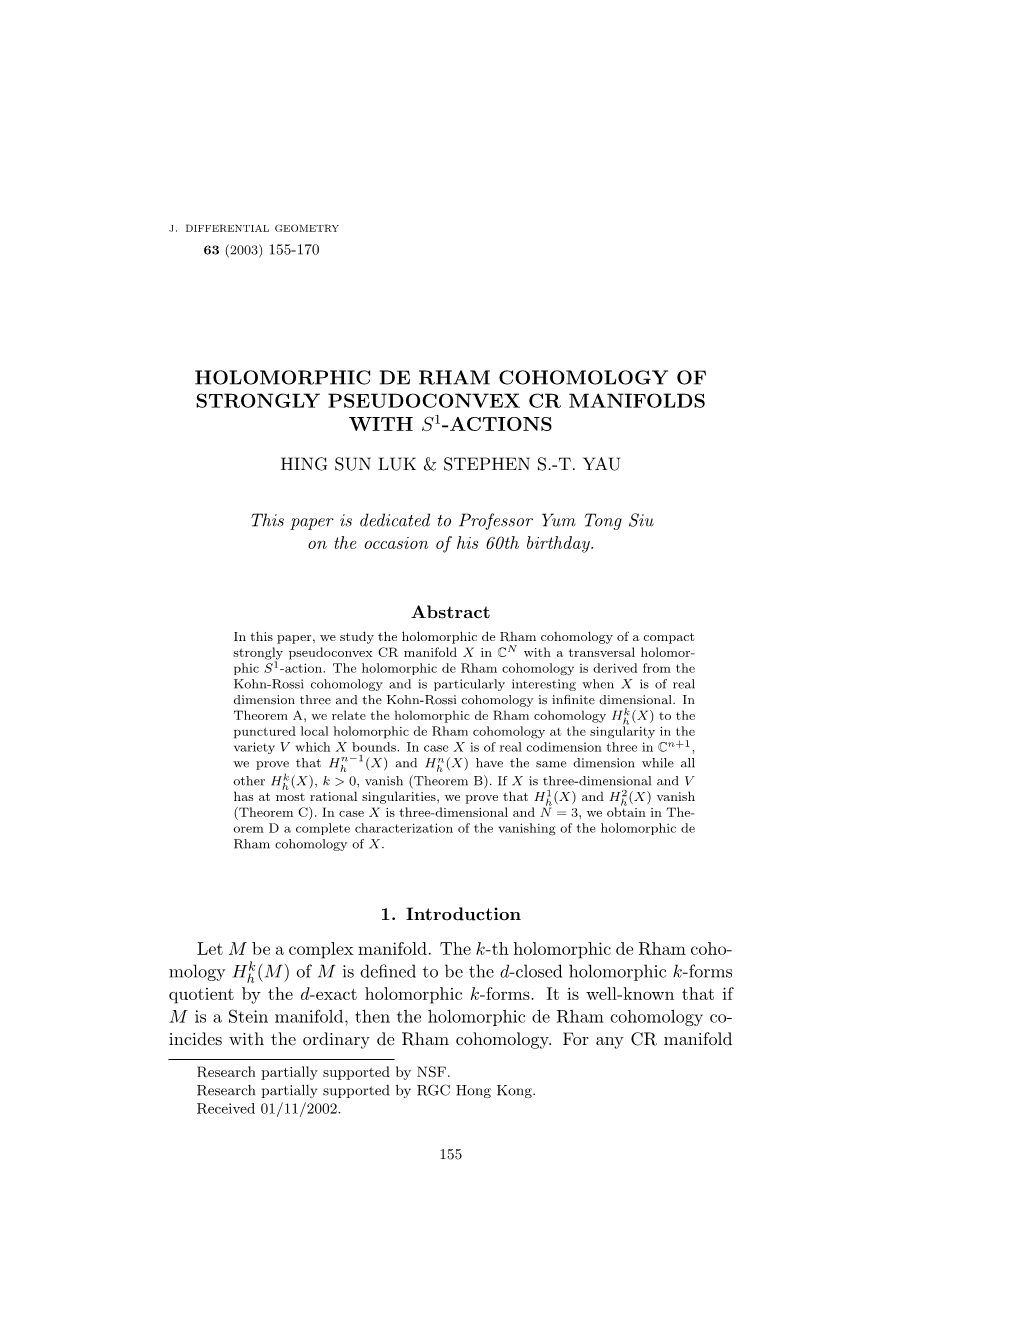 Holomorphic De Rham Cohomology of Strongly Pseudoconvex Cr Manifolds with S1-Actions